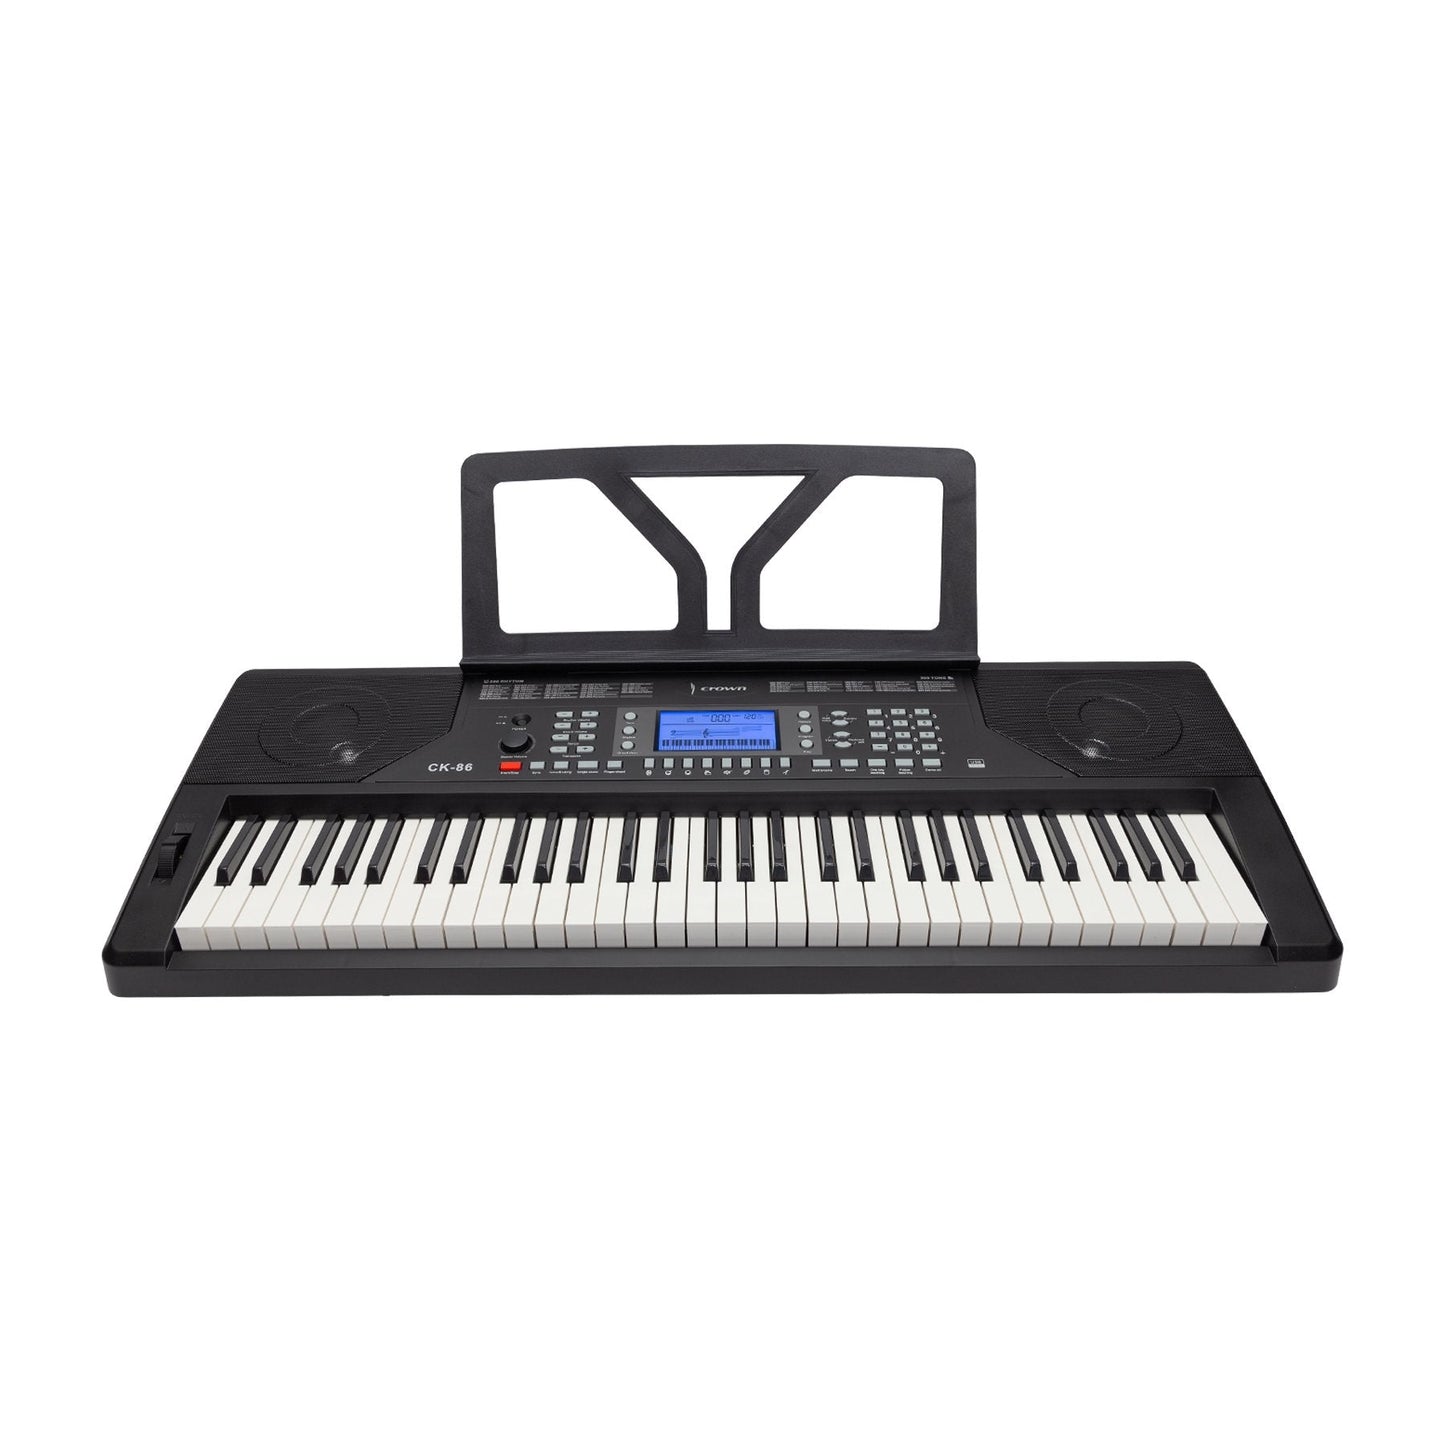 Crown CK-86 Touch Sensitive Multi-Function 61-Key Electronic Portable Keyboard with USB (Black)